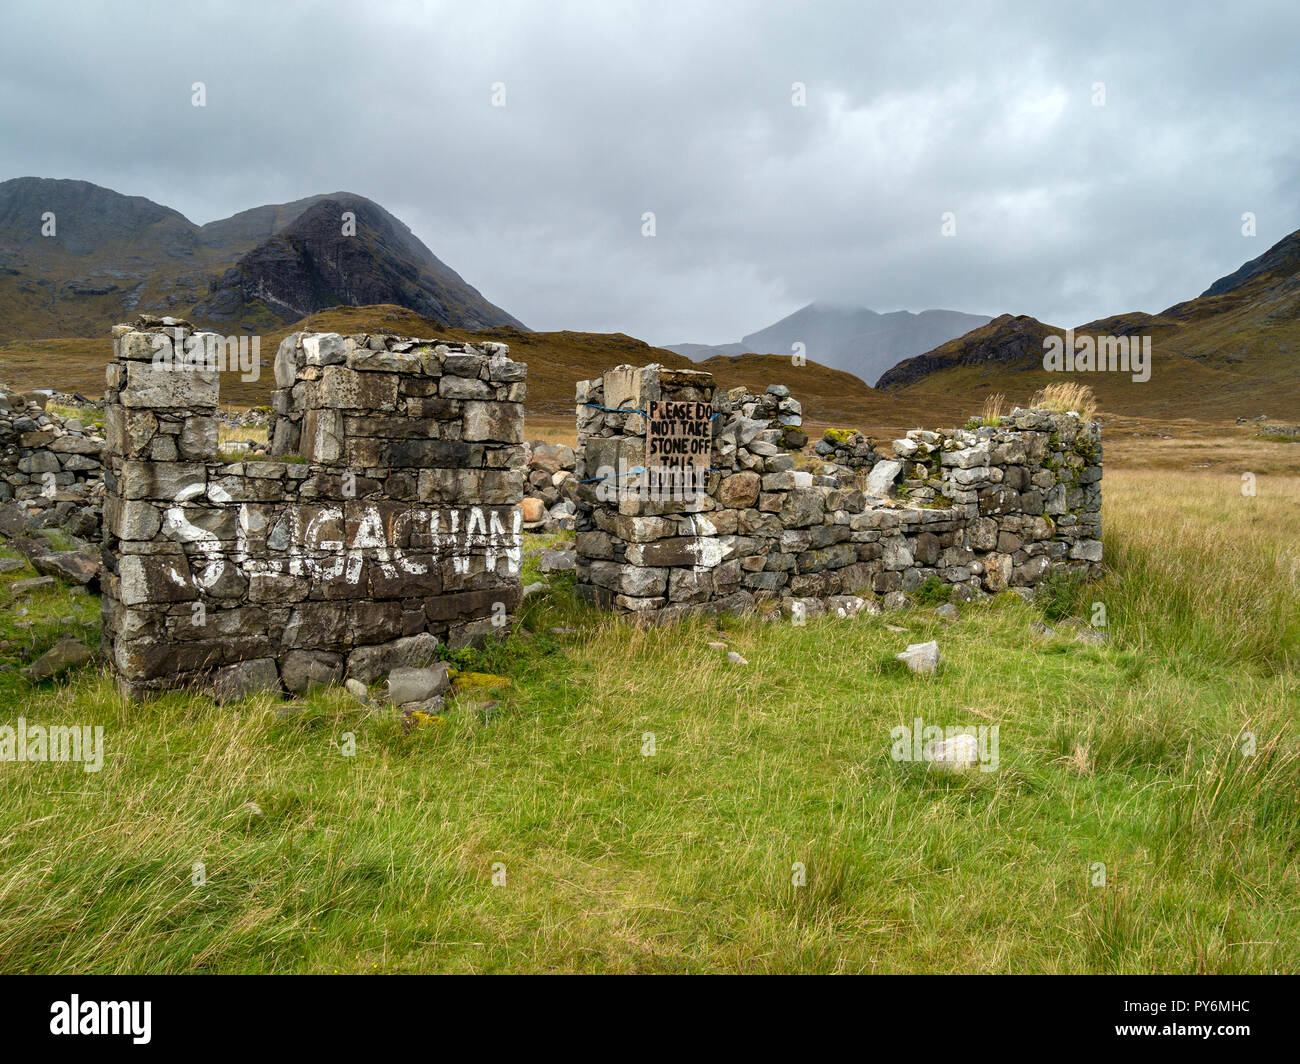 Ruins of old stone building at Camasunary with signs to Sligachan and 'Please do not take stone off this building', Isle of Skye, Scotland, UK. Stock Photo